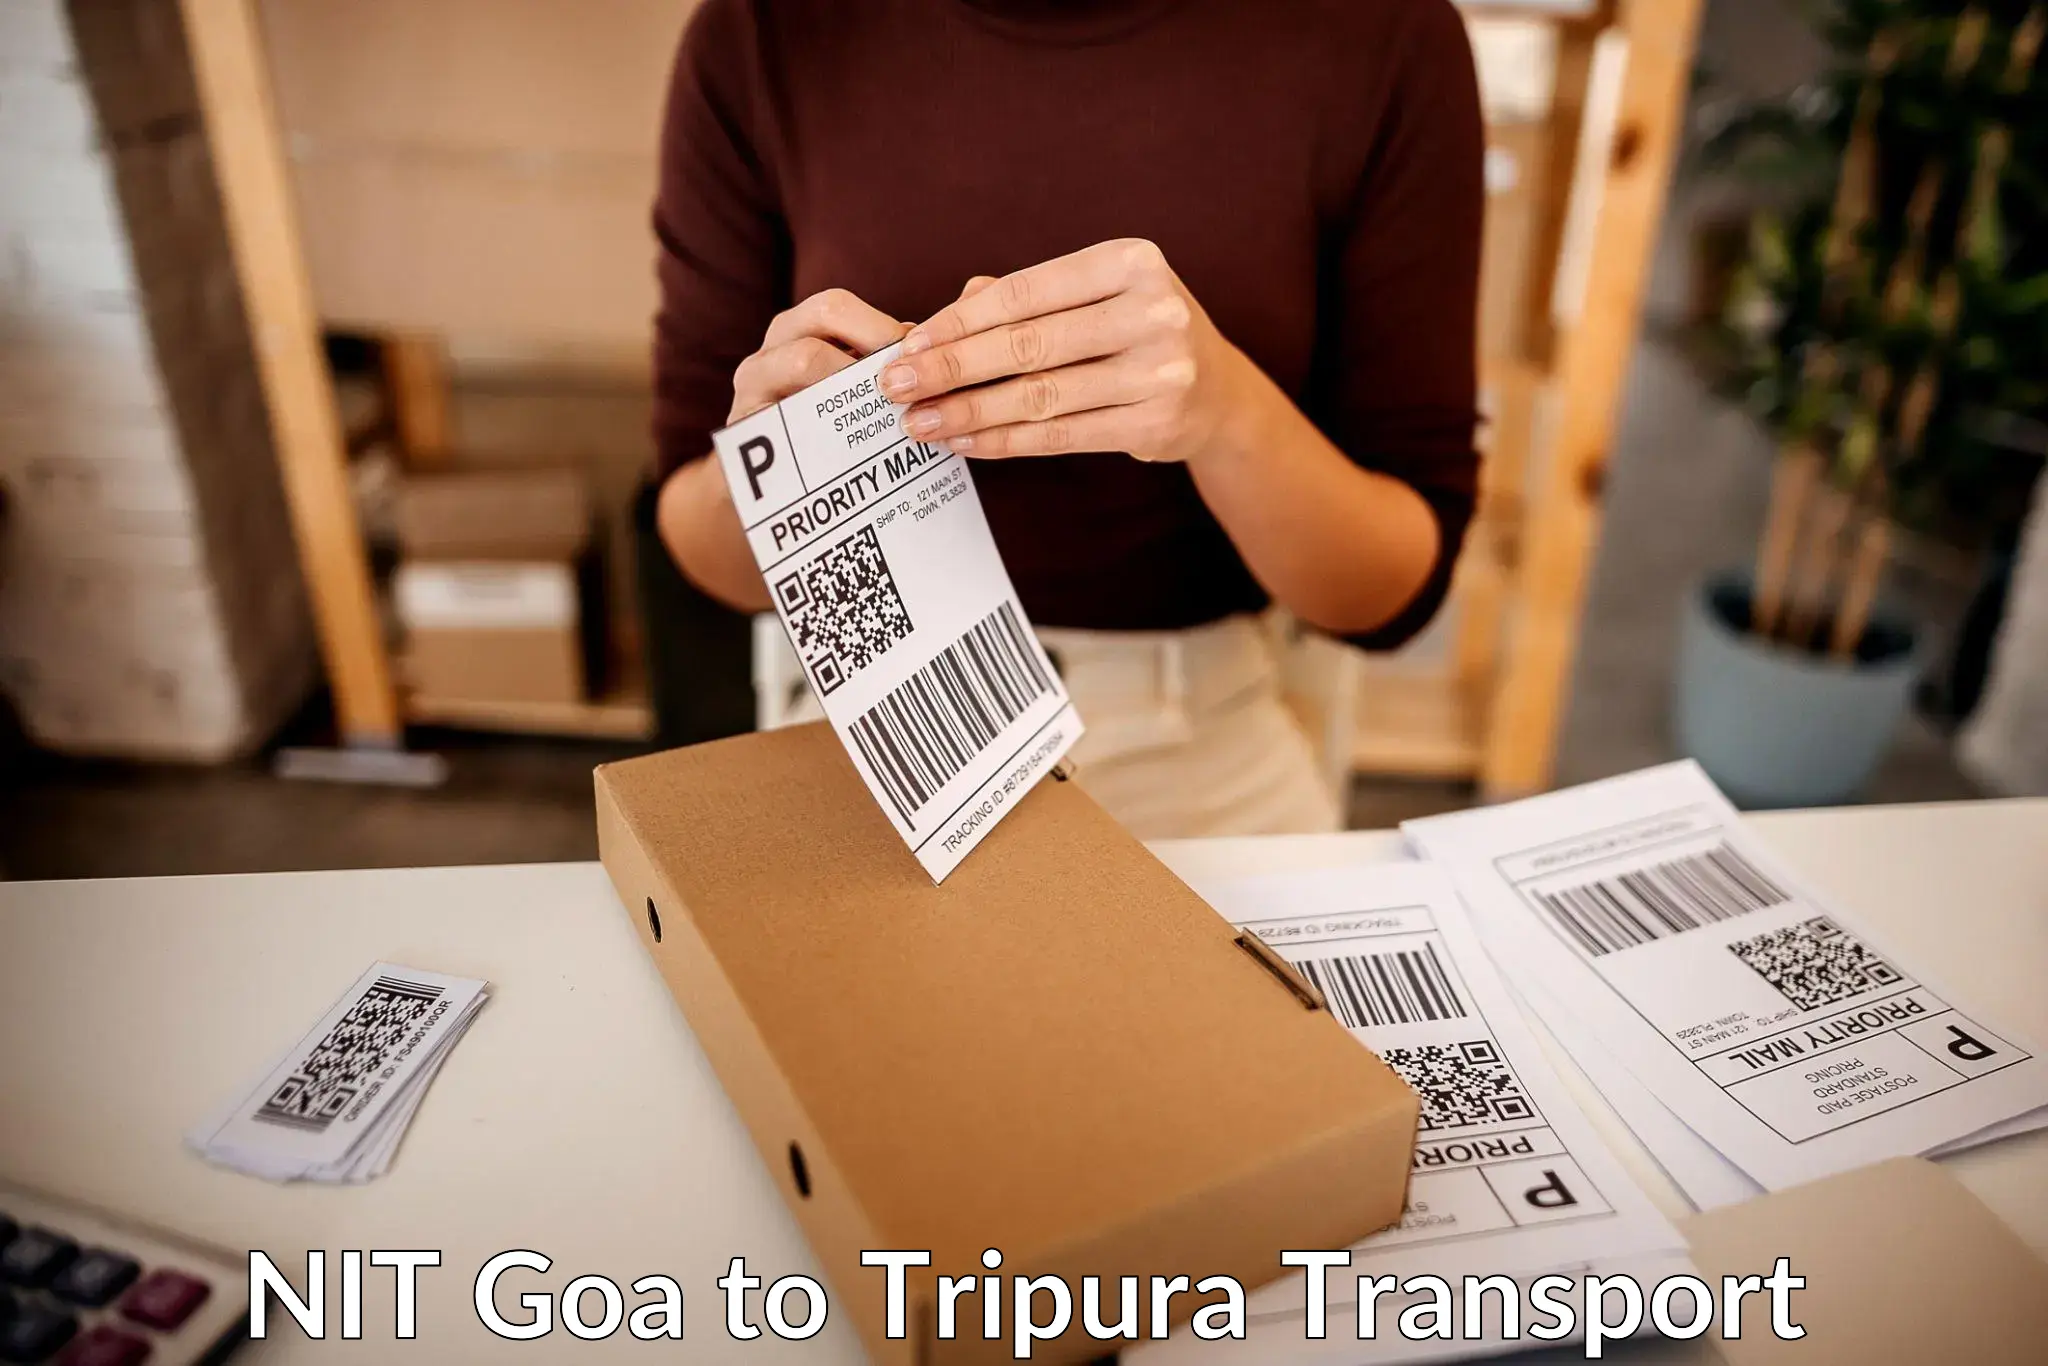 Container transport service NIT Goa to Udaipur Tripura